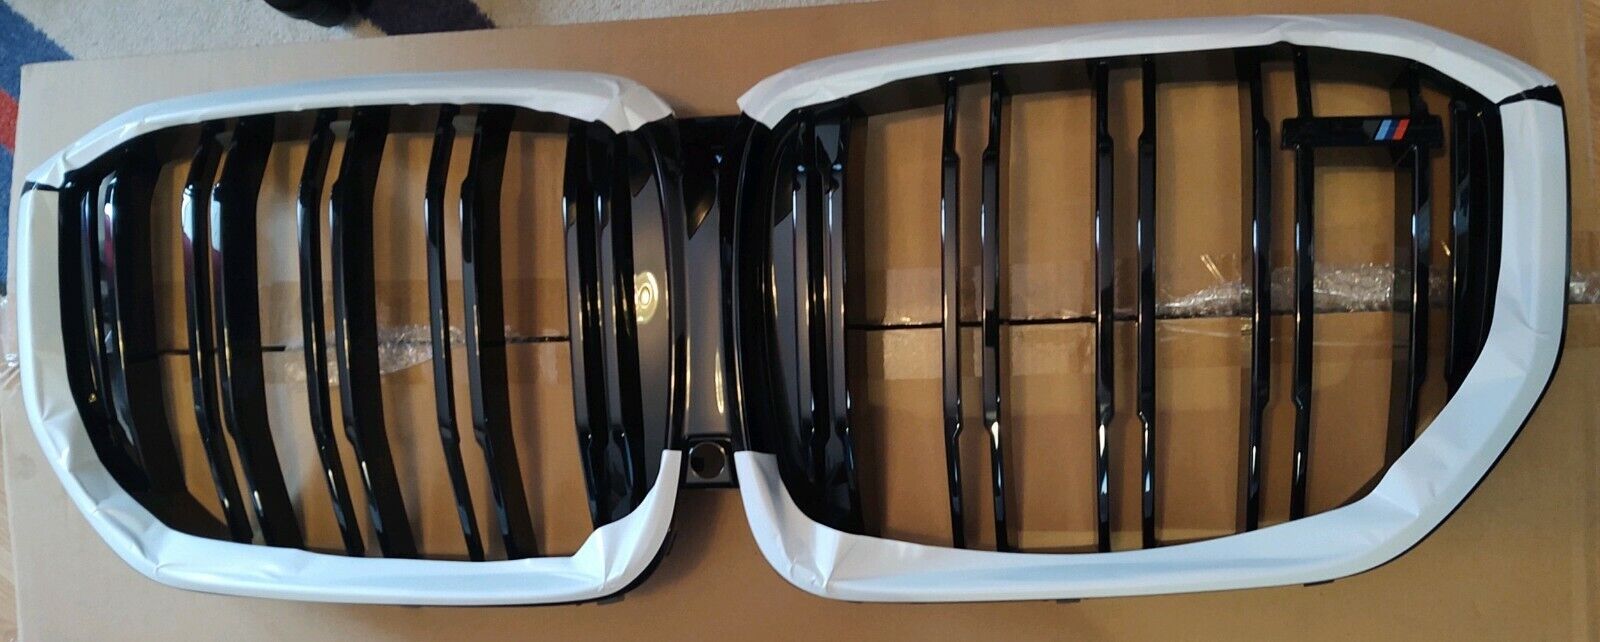 BMW OEM 2019+ G05 F95 X5 M Front Grille Gloss Black Competition Brand New